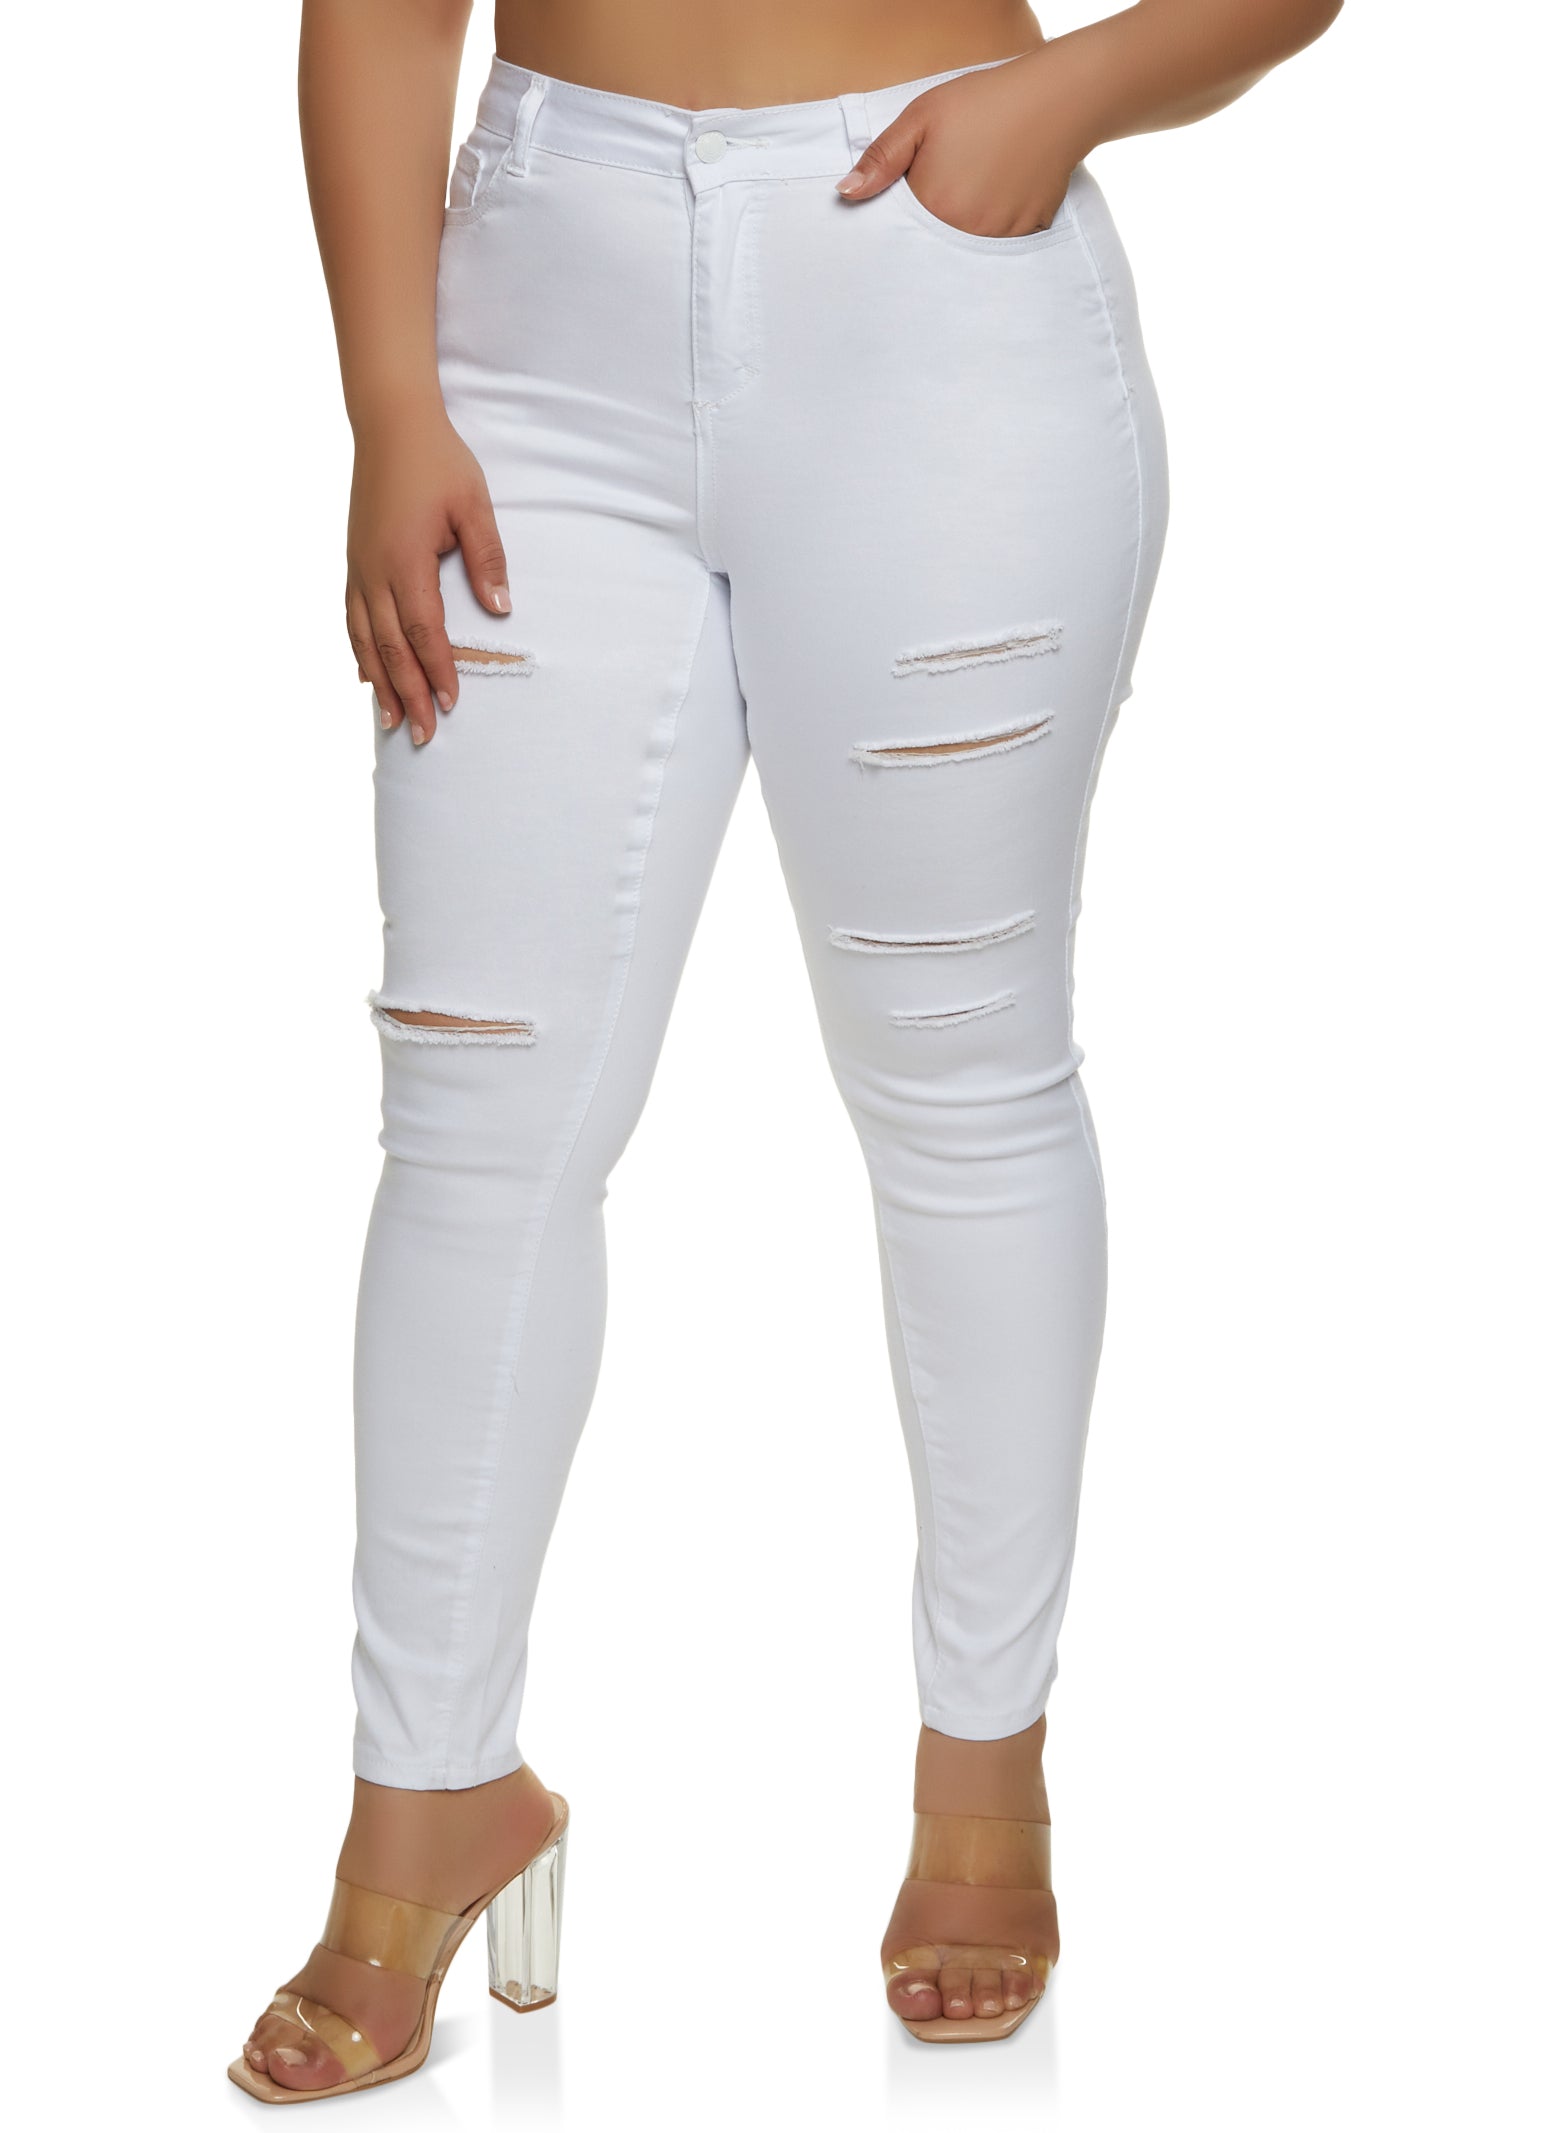 Plus Size Distressed High Waist Jeans - White